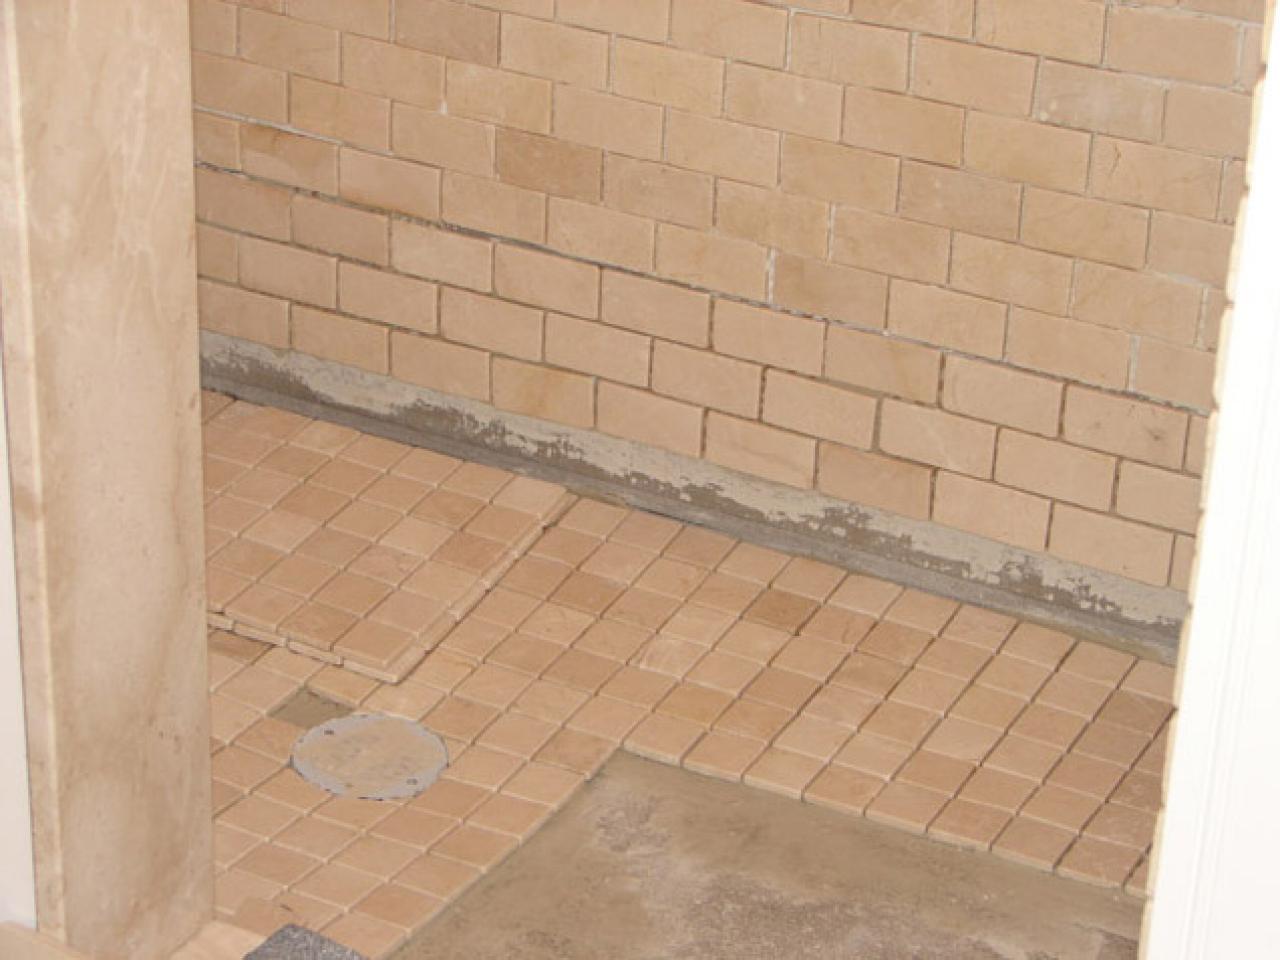 Install Tile In A Bathroom Shower, How To Install Tile Shower Floor On Concrete